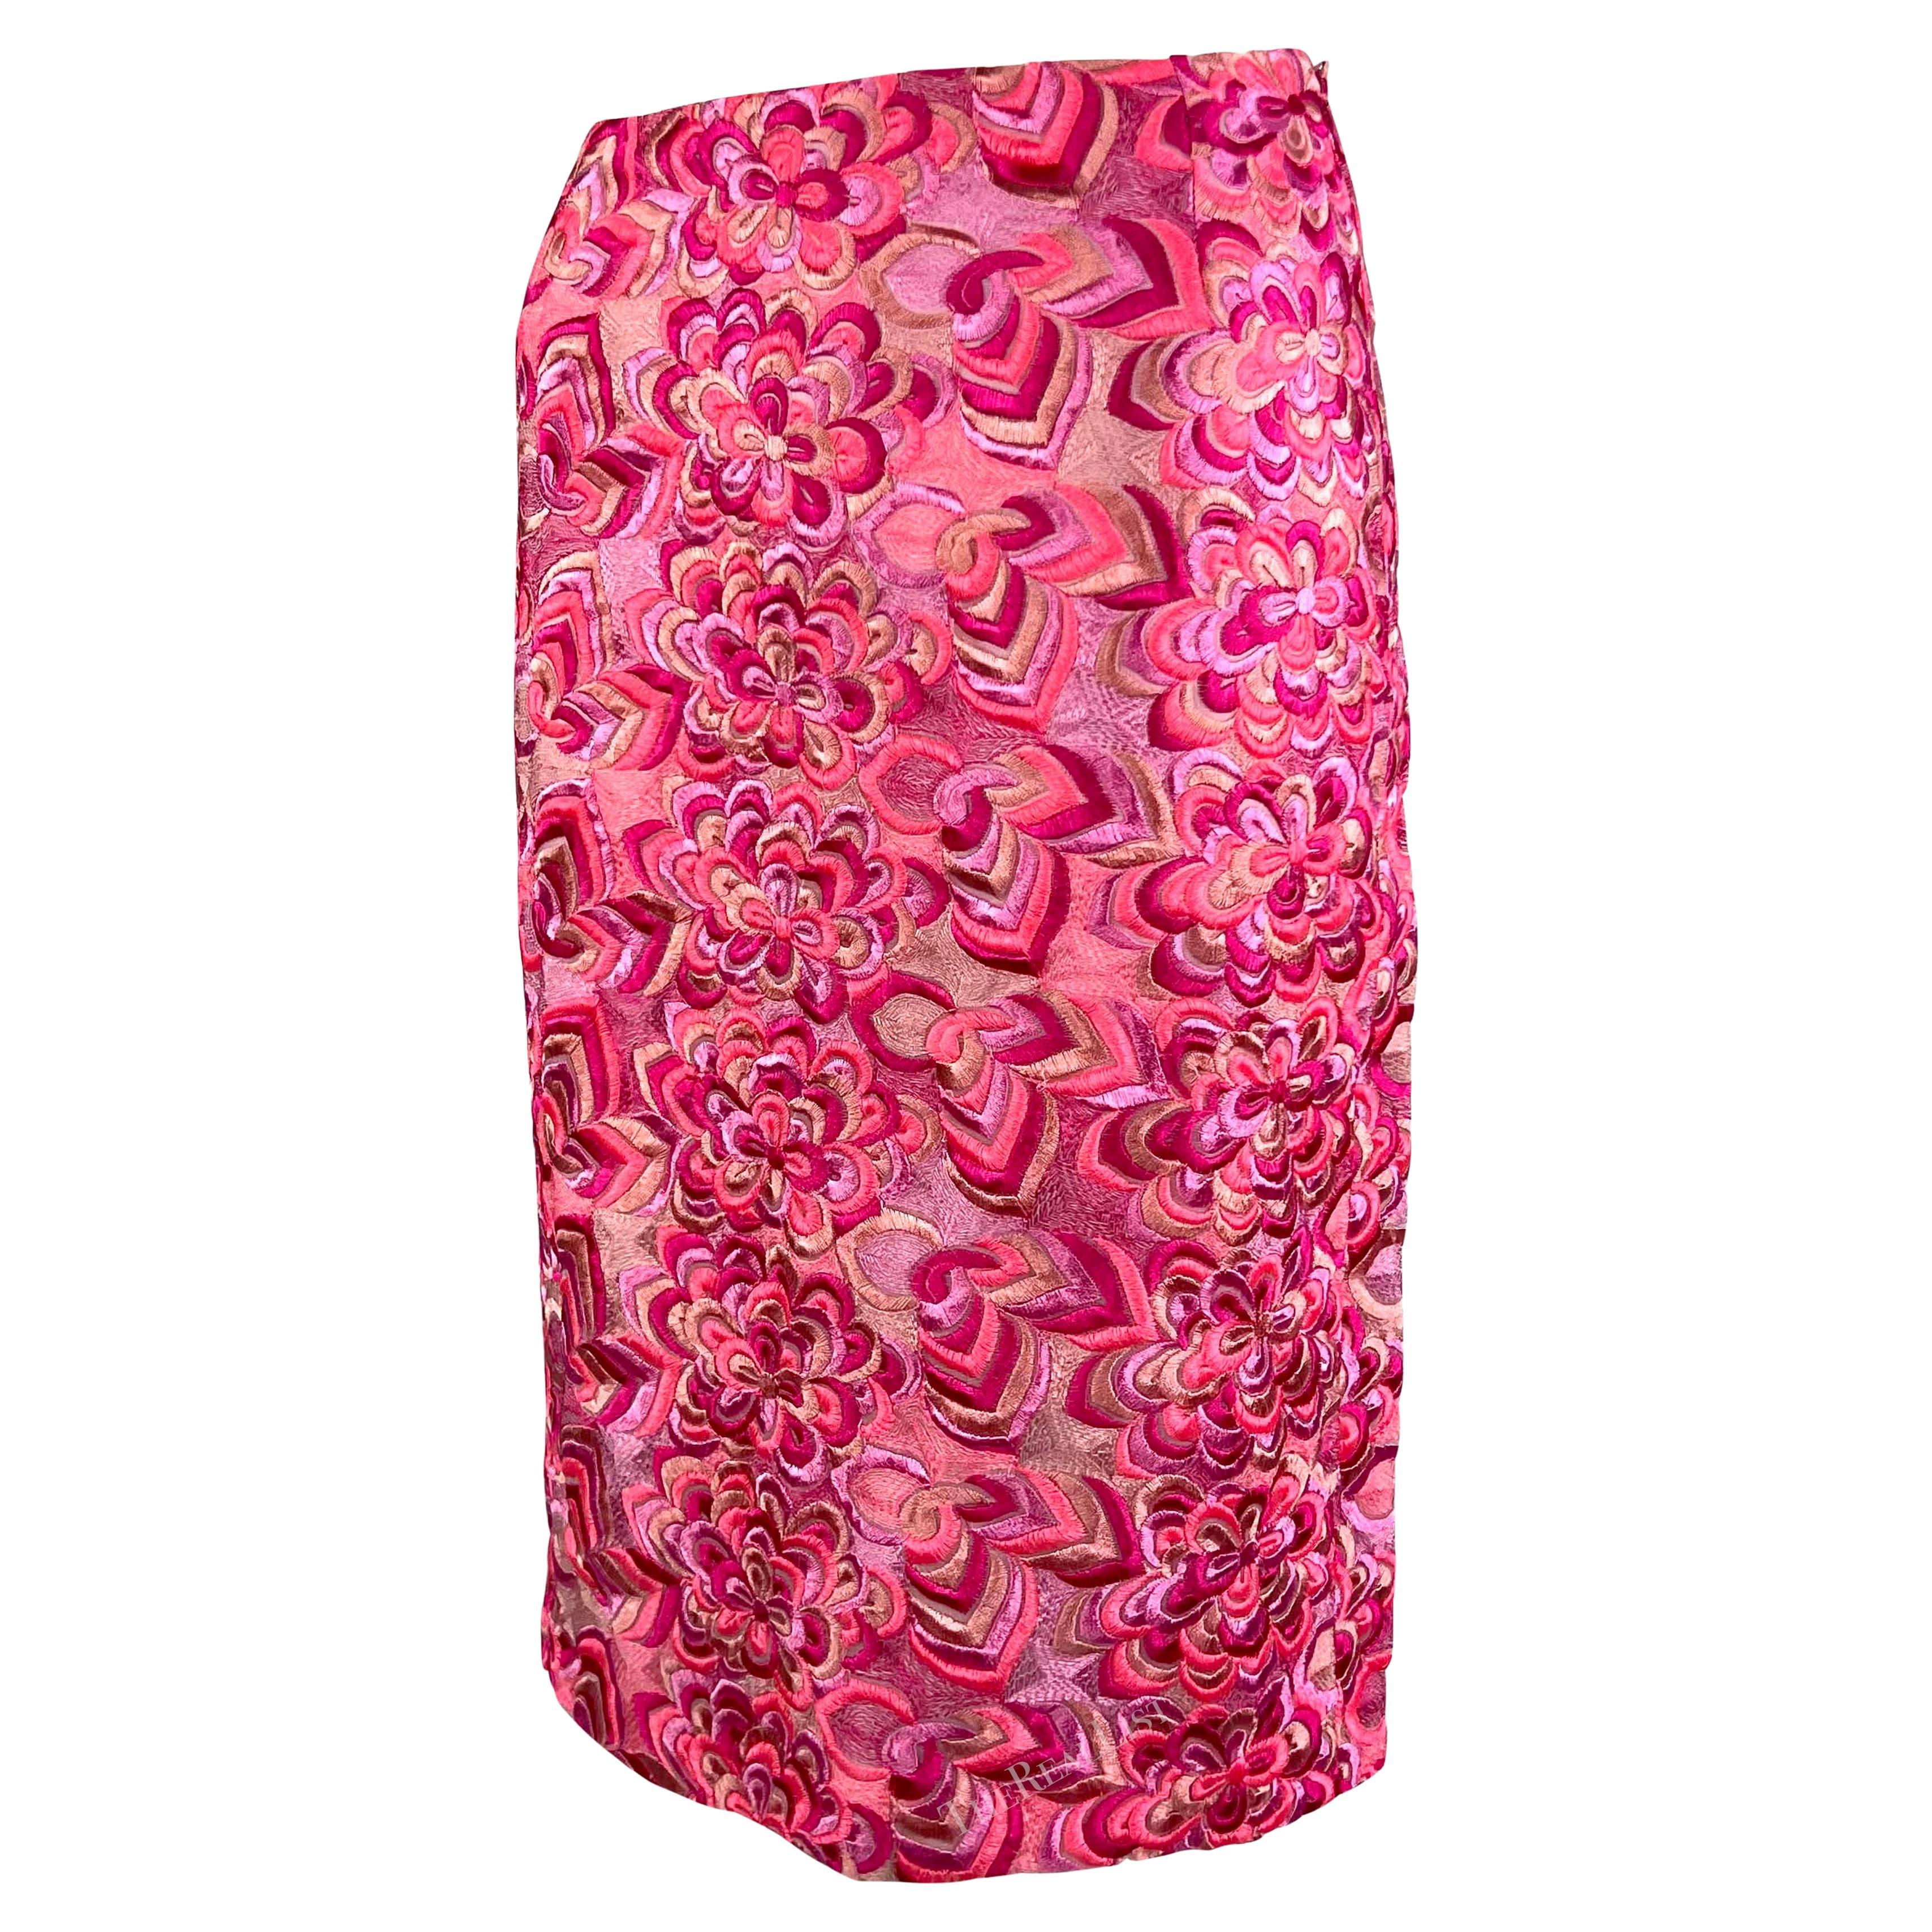 S/S 2000 Gianni Versace by Donatella Versace for Gianni Versace for Gianni Versace for Gianni Versace for Gianni Versace by Donatella Neon Pink Floral Embroidered Skirt Excellent état - En vente à West Hollywood, CA